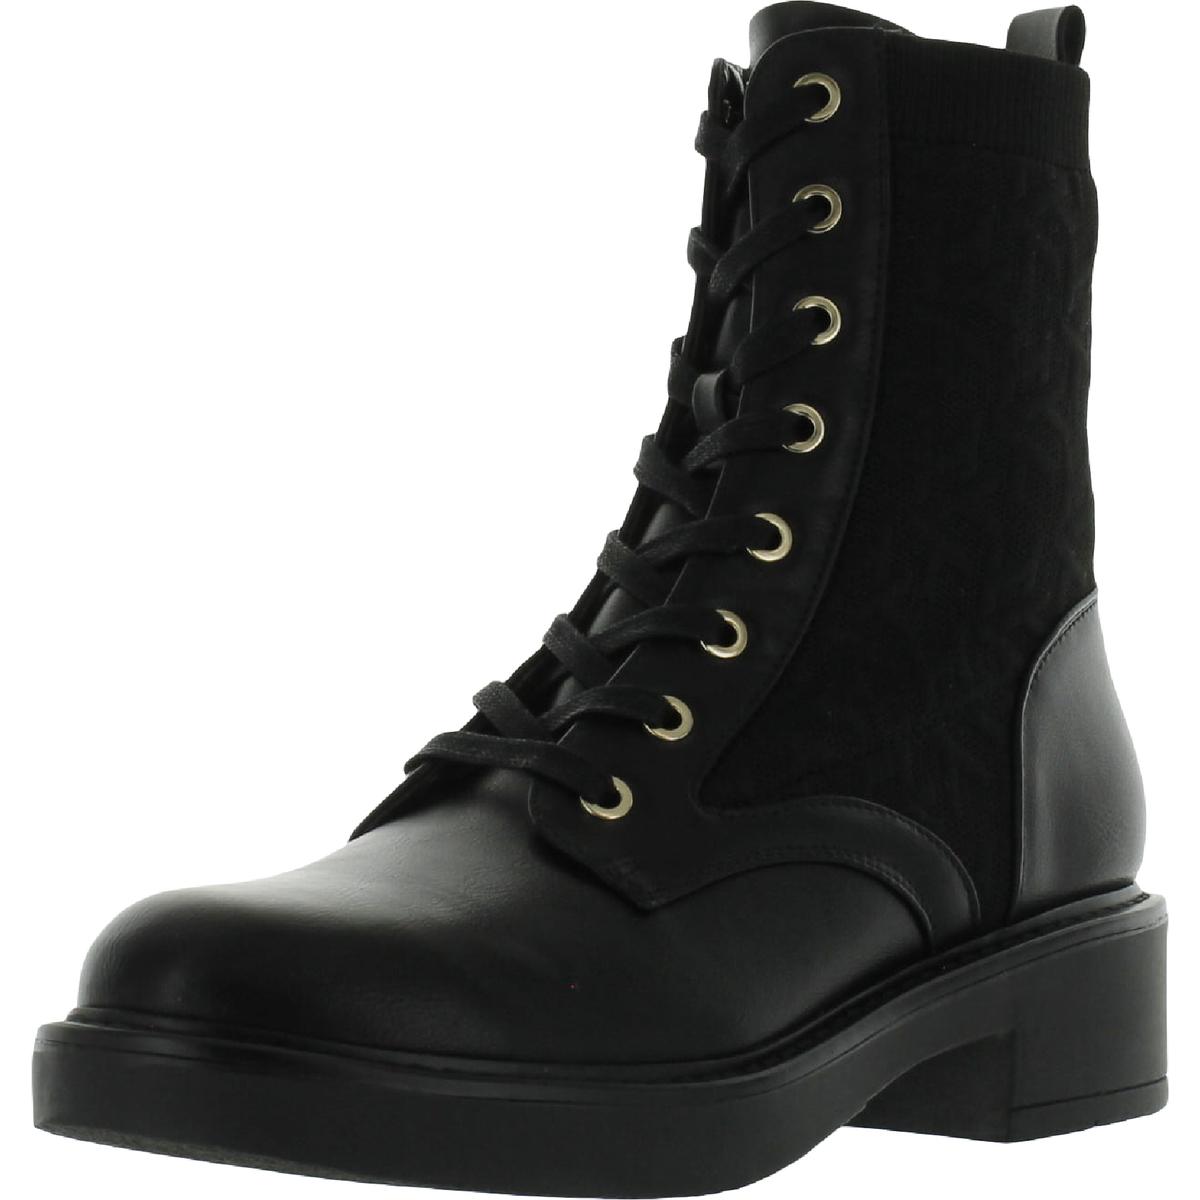 Tommy Hilfiger Womens Treyna Logo Lace Up Combat & Lace-up Boots Shoes BHFO 7817